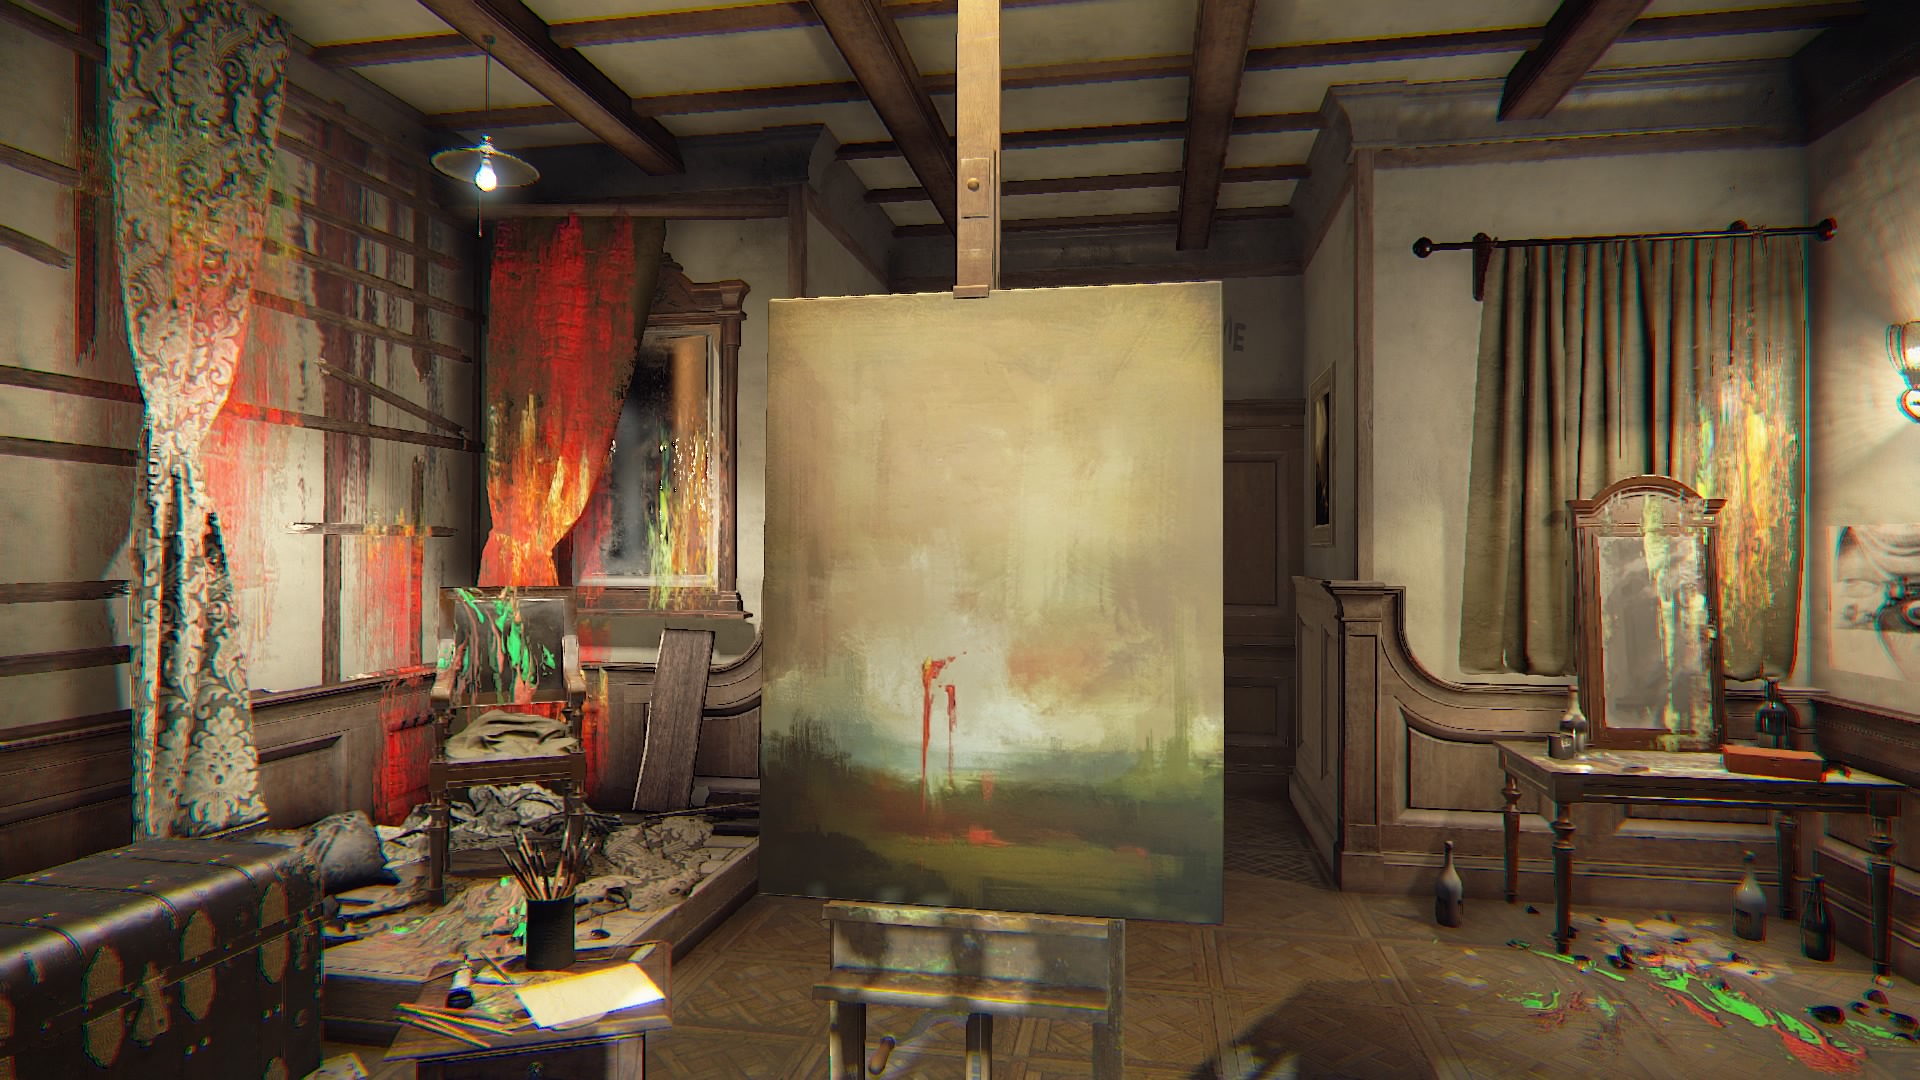 Under the Layers of Fear: Canvas – All Your Base Online